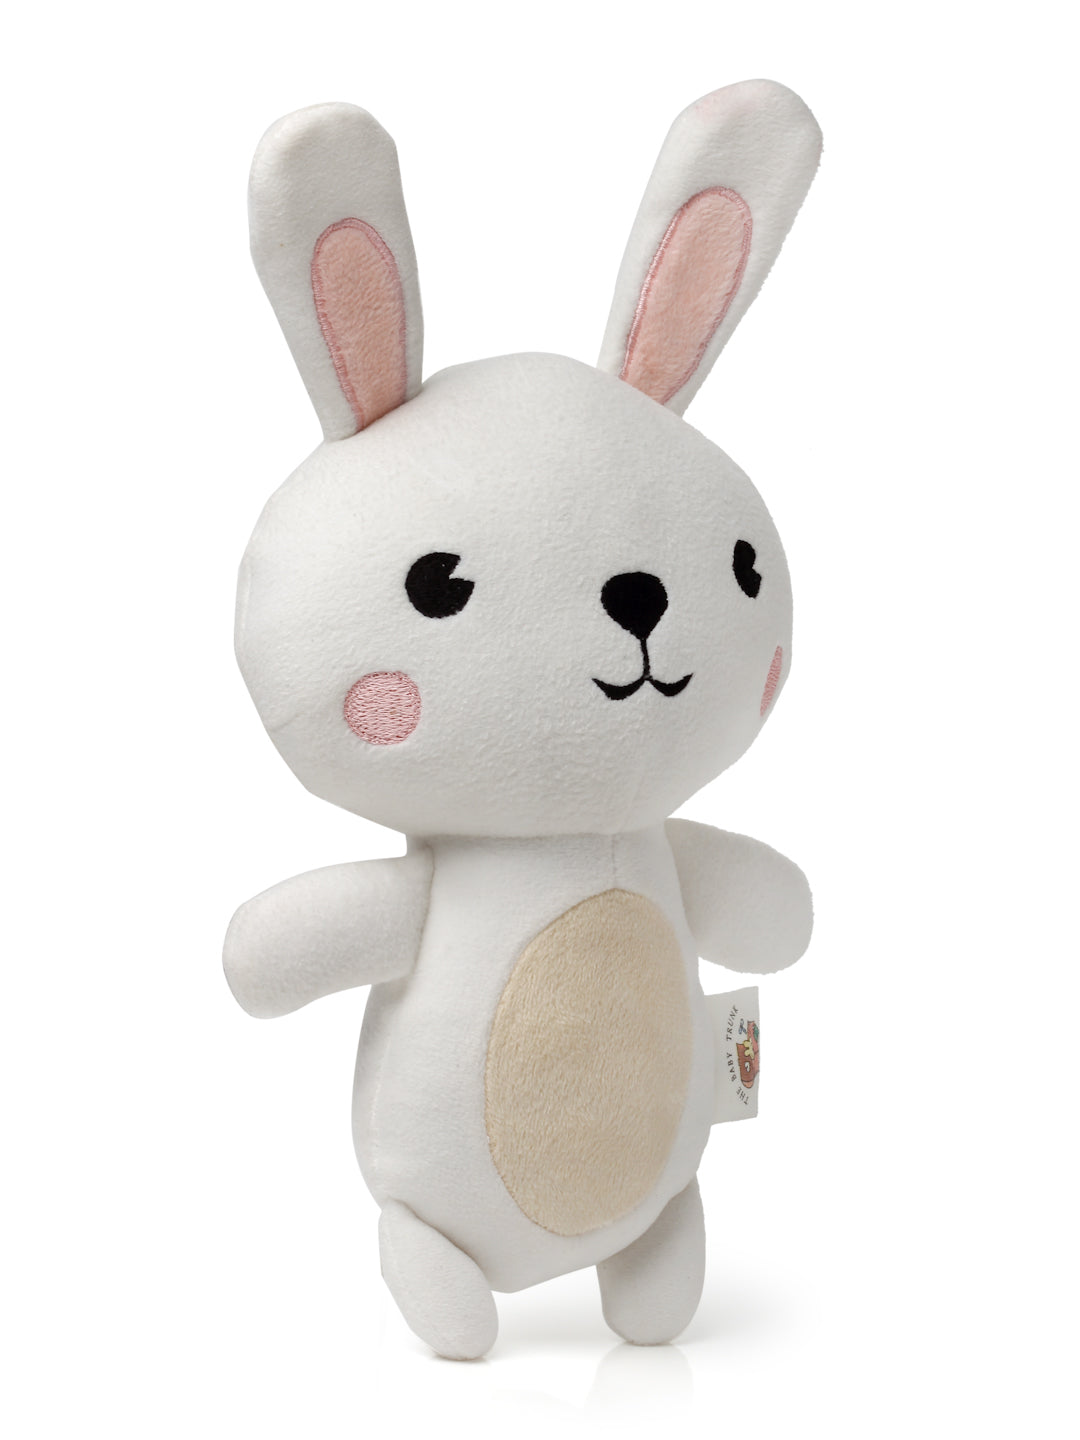 Bunny Soft Toy for Newborn Babies